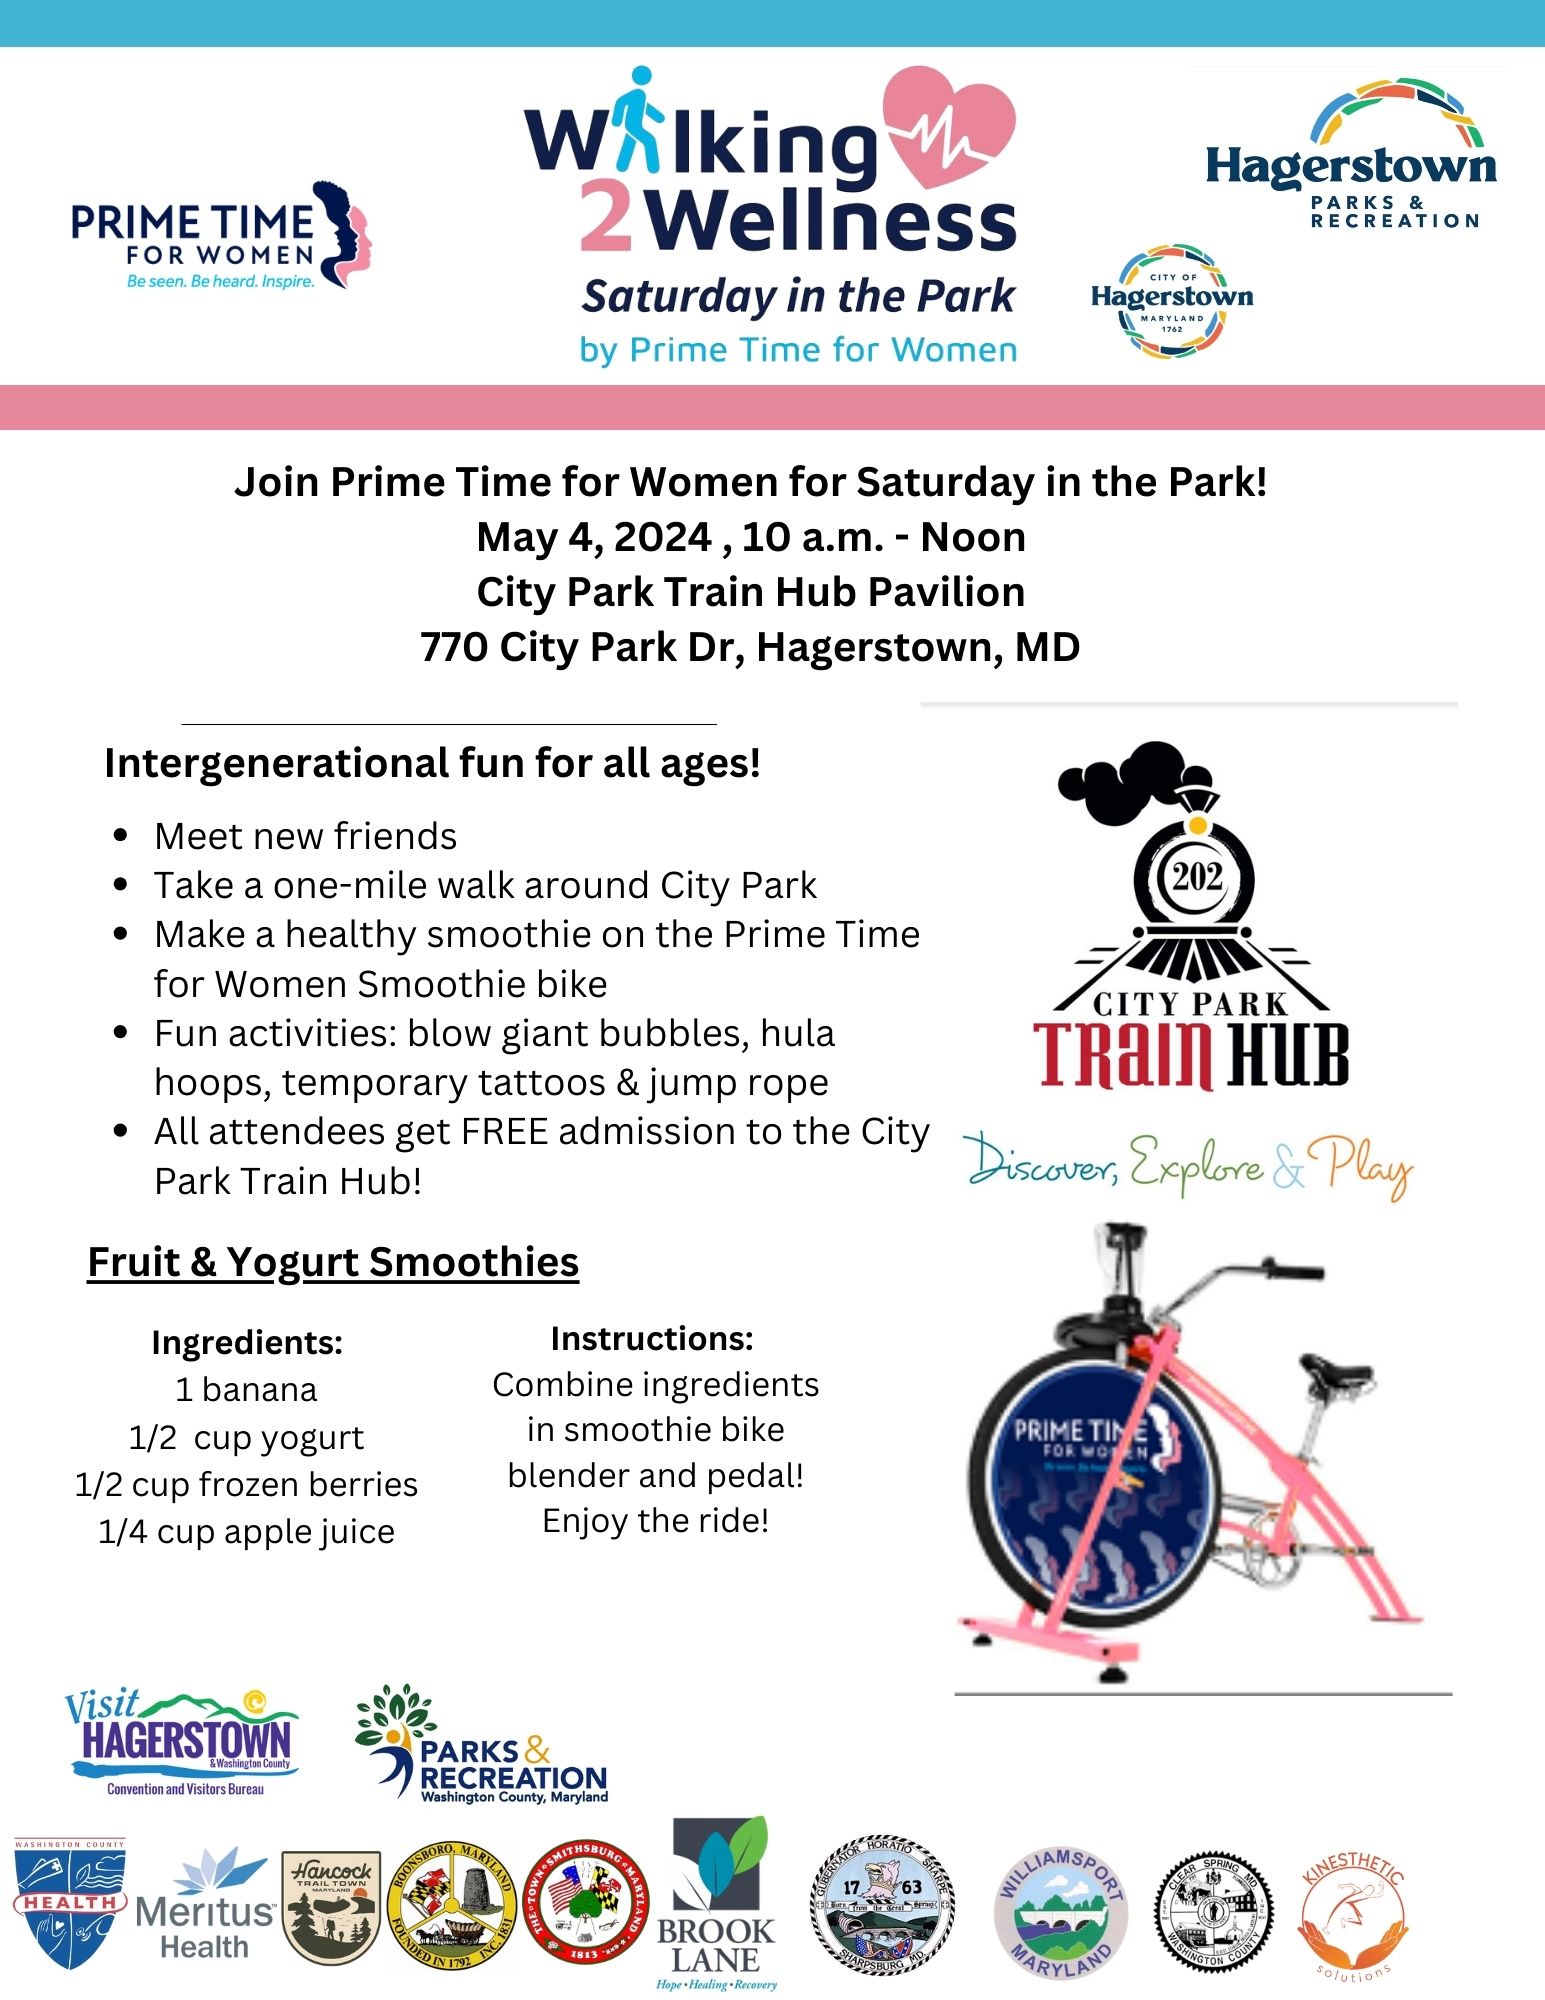 Image: Saturday in the Park event promotional flyer; logos of all sponsors including the health department; Illustrations of City Park Train Hub and Prime Time for Women smoothie bike; Text: Event is May 4, 10 a.m.-noon; City Park Train Hub Pavilion in Hagerstown; list of fun, intergenerational activities; fruit and yogurt smoothie recipe.